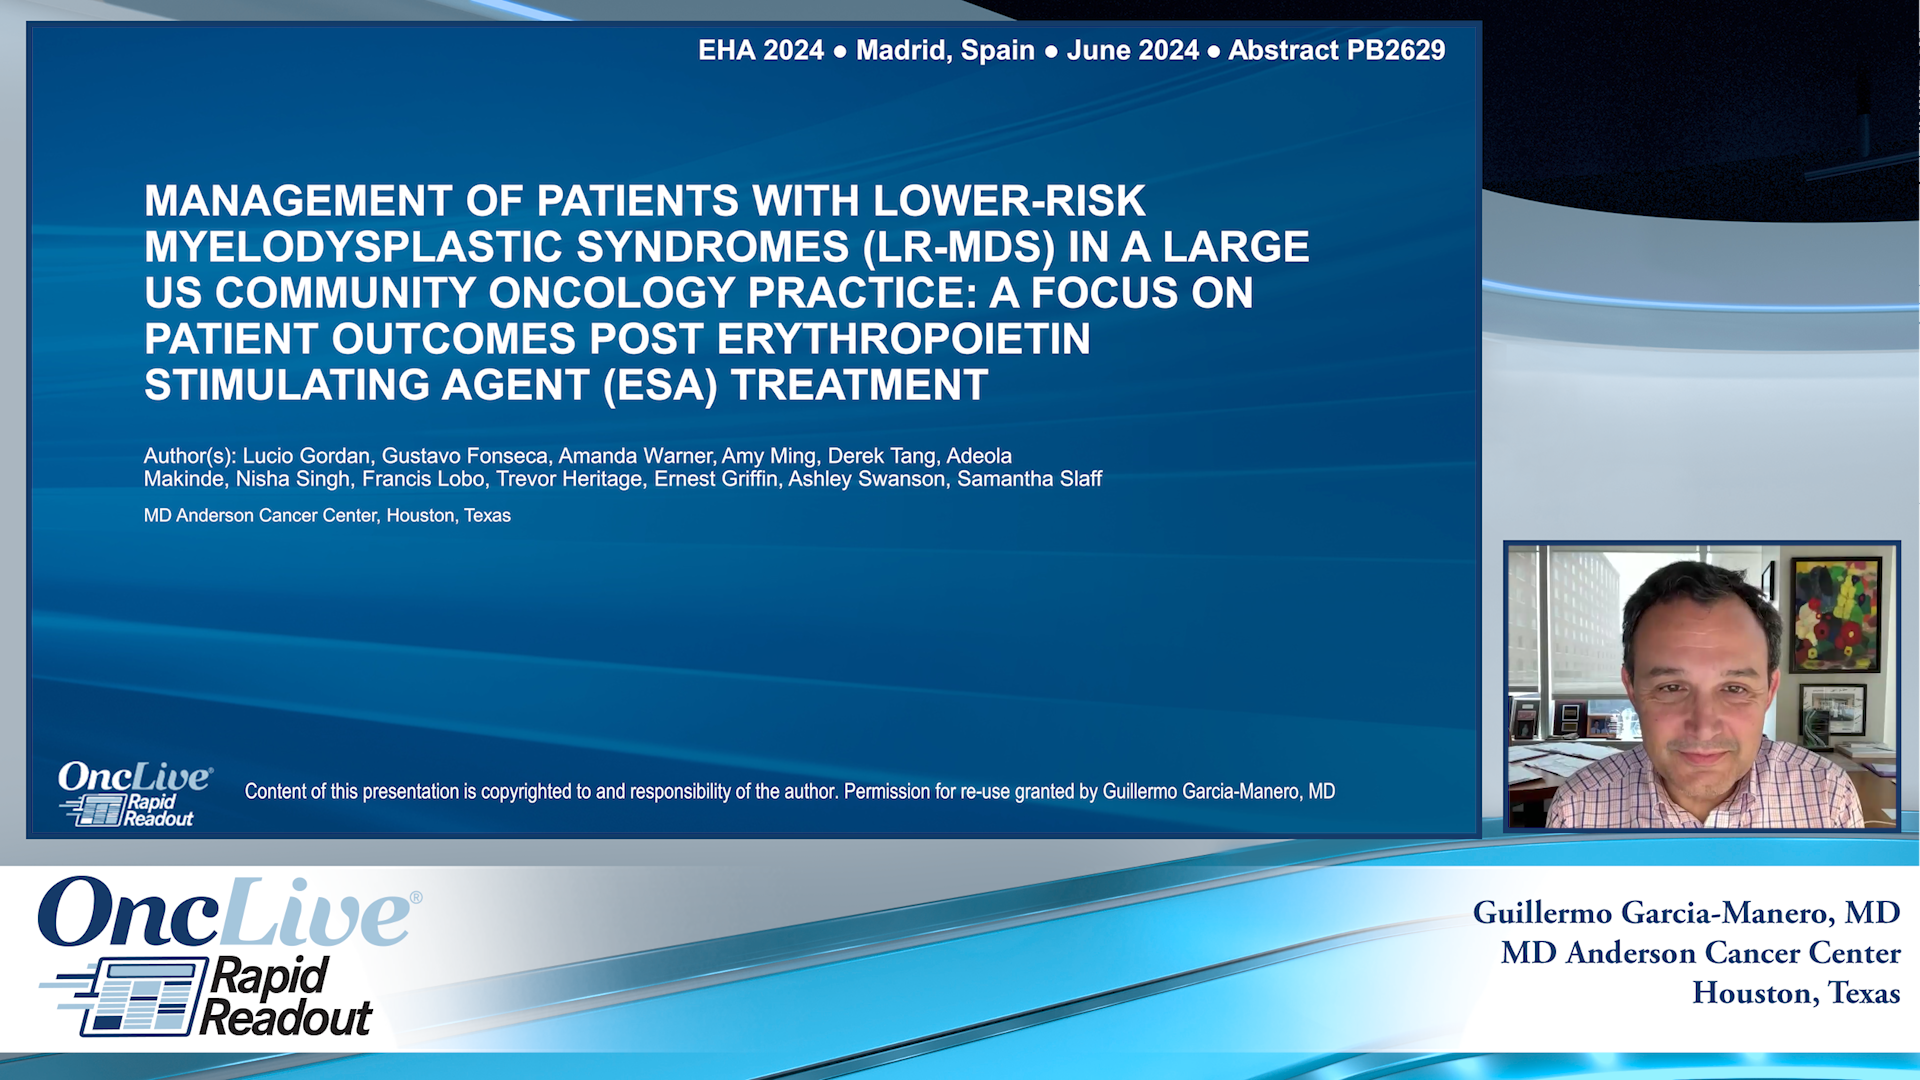 Management of Patients With Lower-Risk Myelodysplastic Syndromes (LR-MDS) in a Large US Community Oncology Practice: A Focus on Patient Outcomes Post Erythropoietin Stimulating Agent (ESA) Treatment